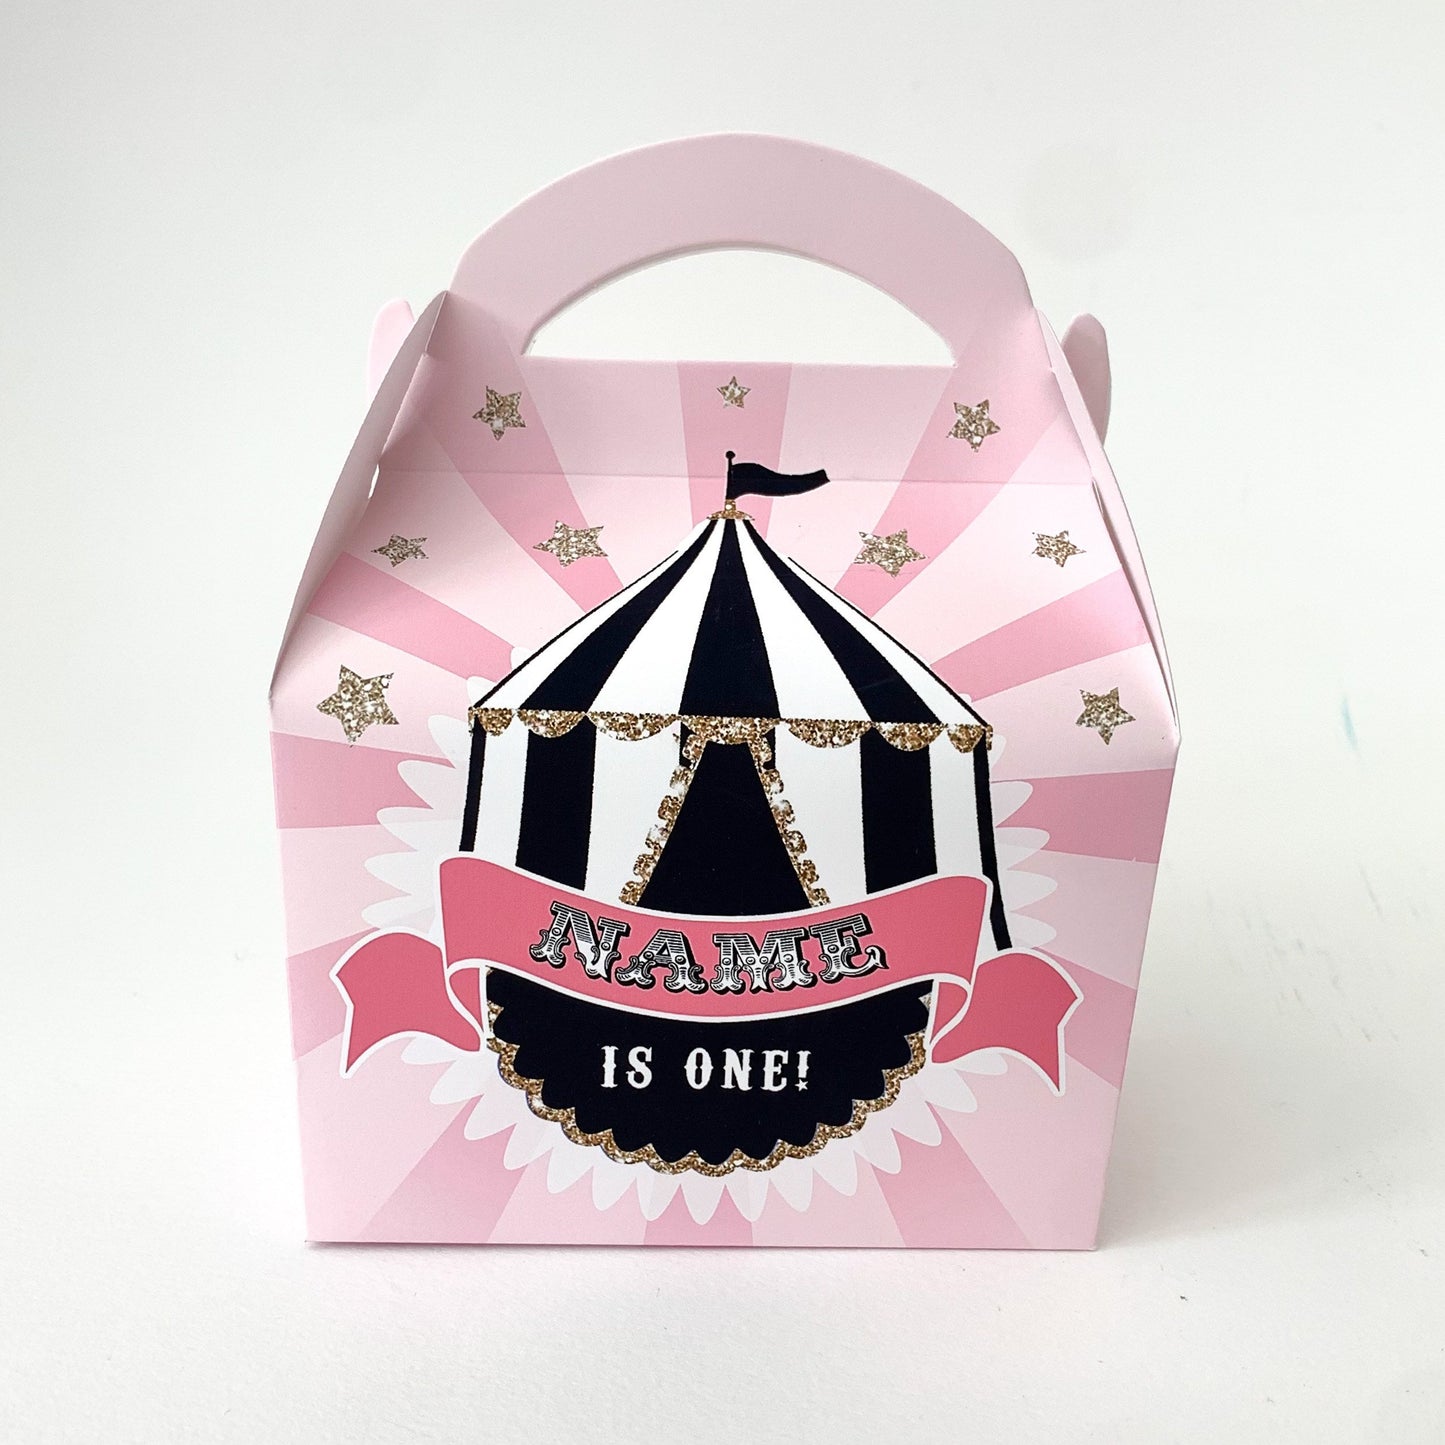 Circus carnival Personalised Children’s Party Box